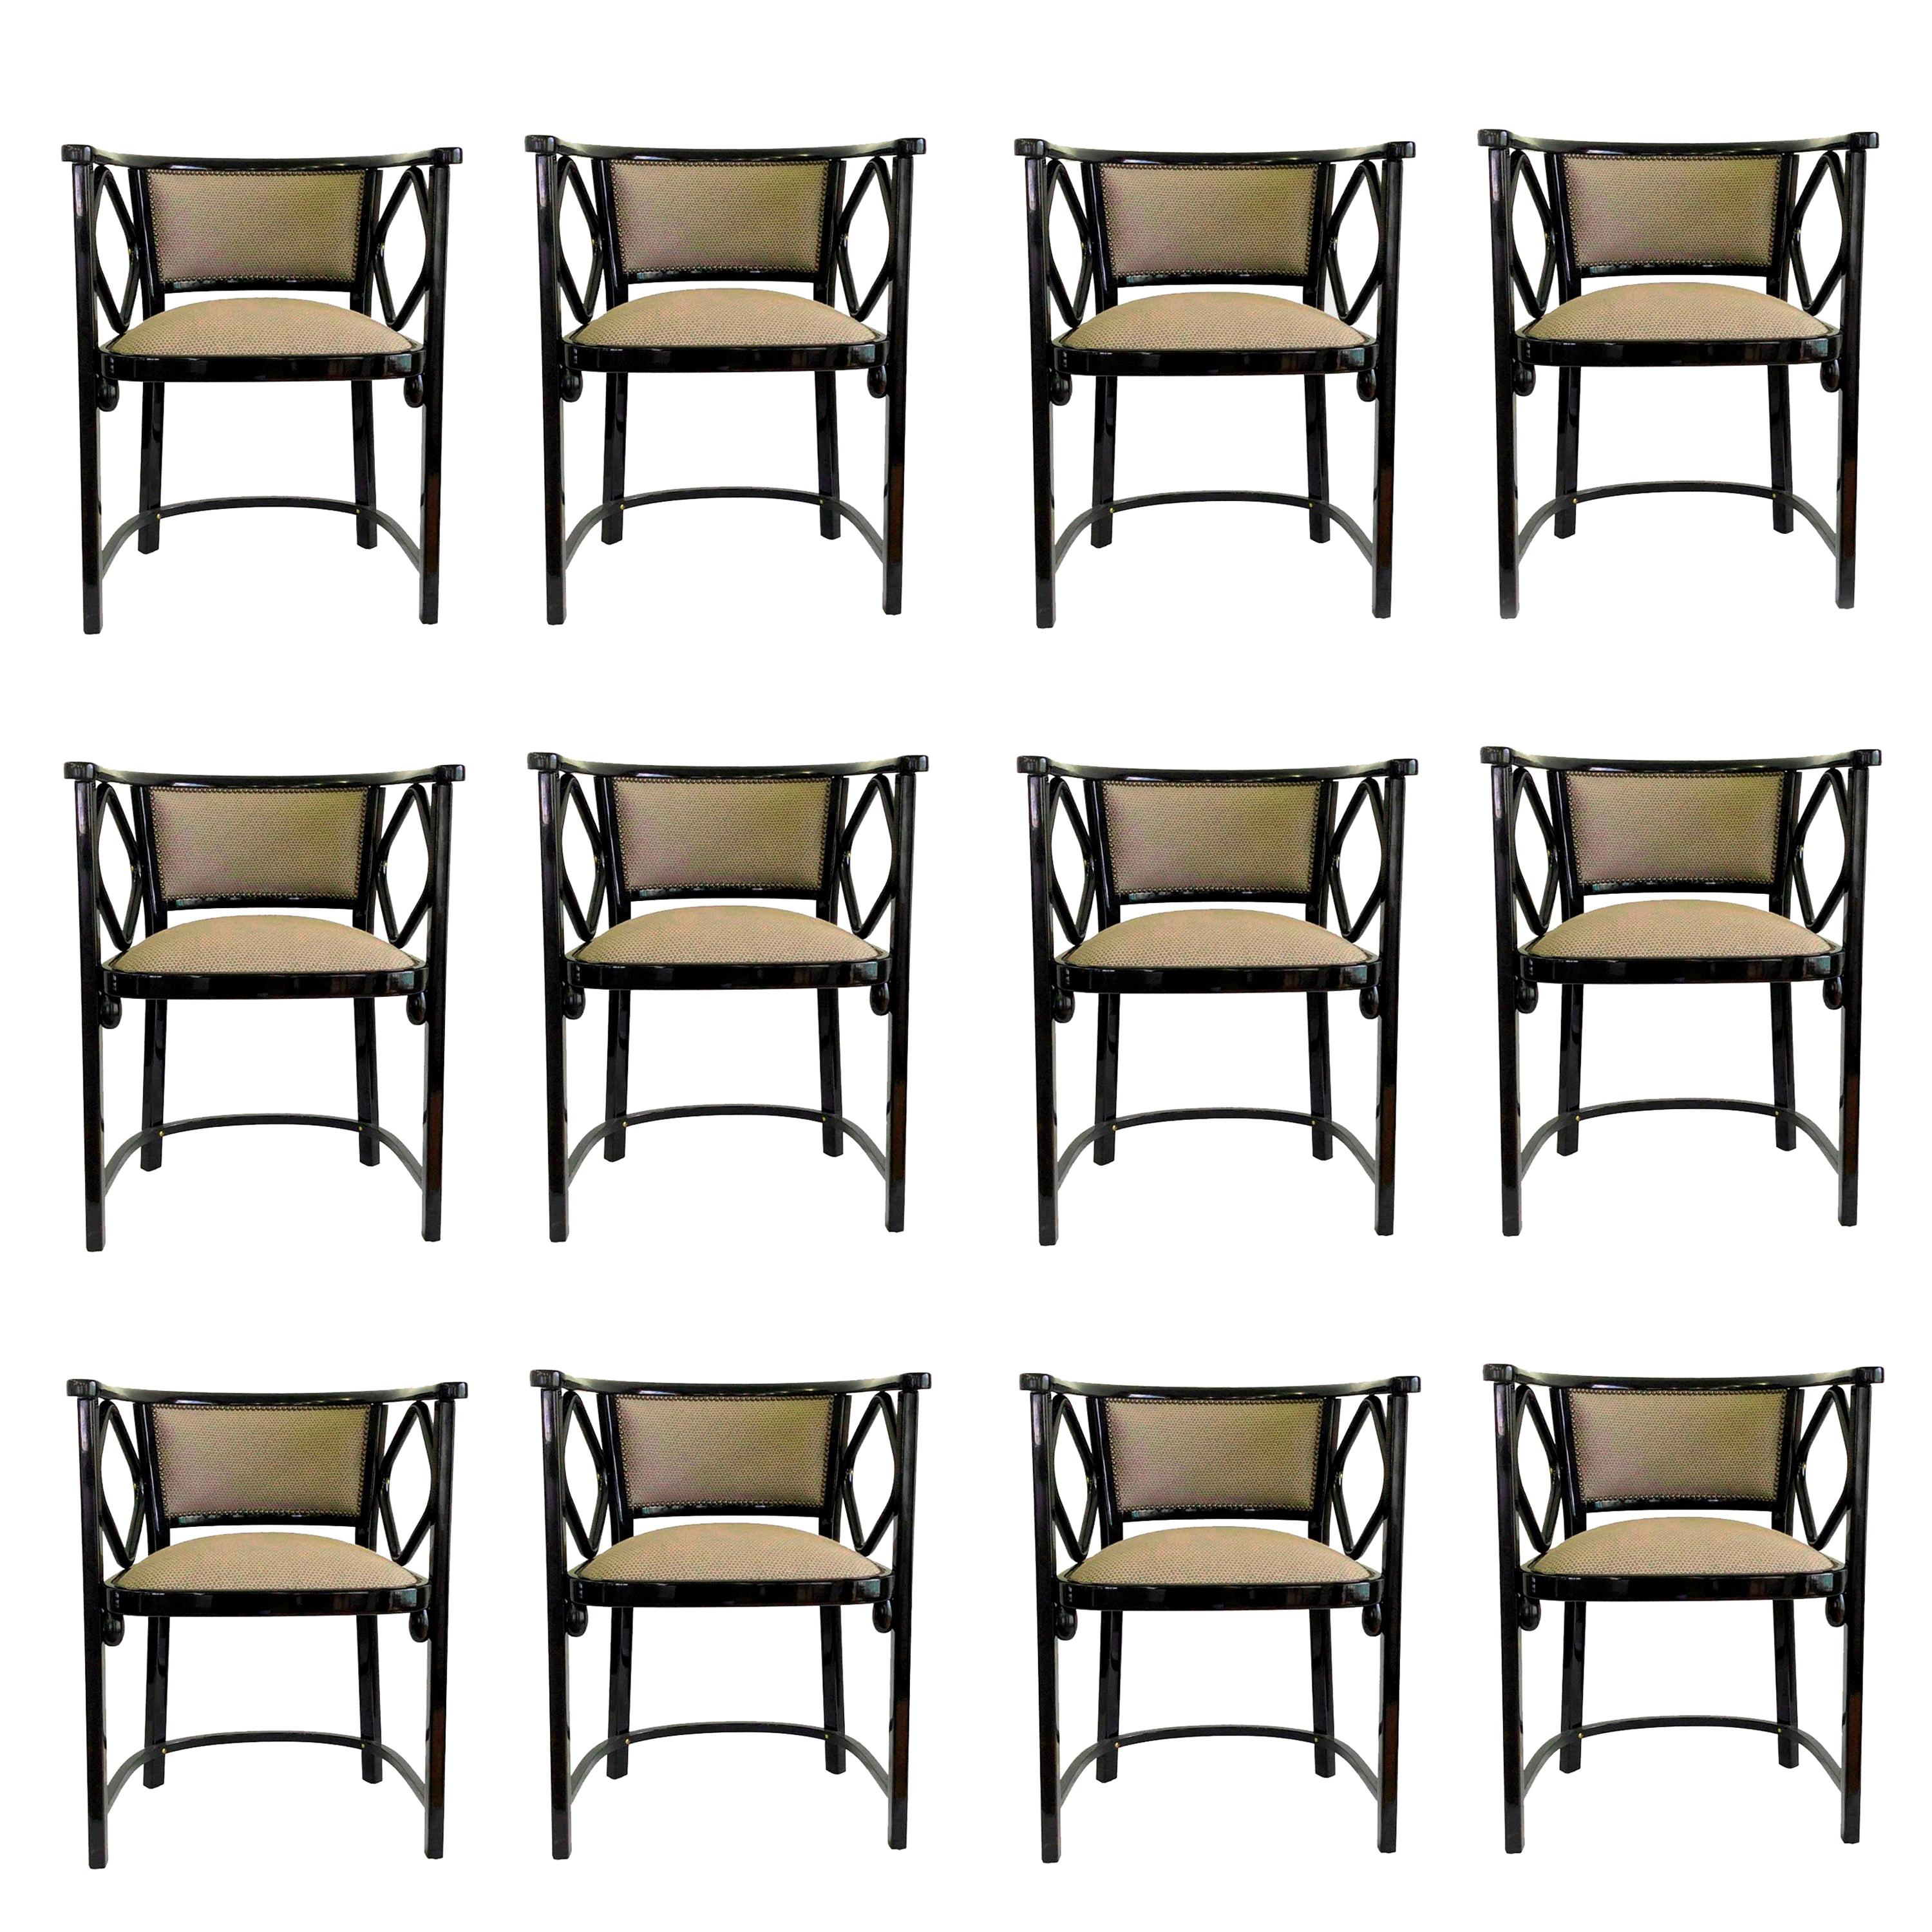 12 Josef Hoffmann Attributed Thonet Bentwood Fledermaus Chairs, Austria, 1930s For Sale